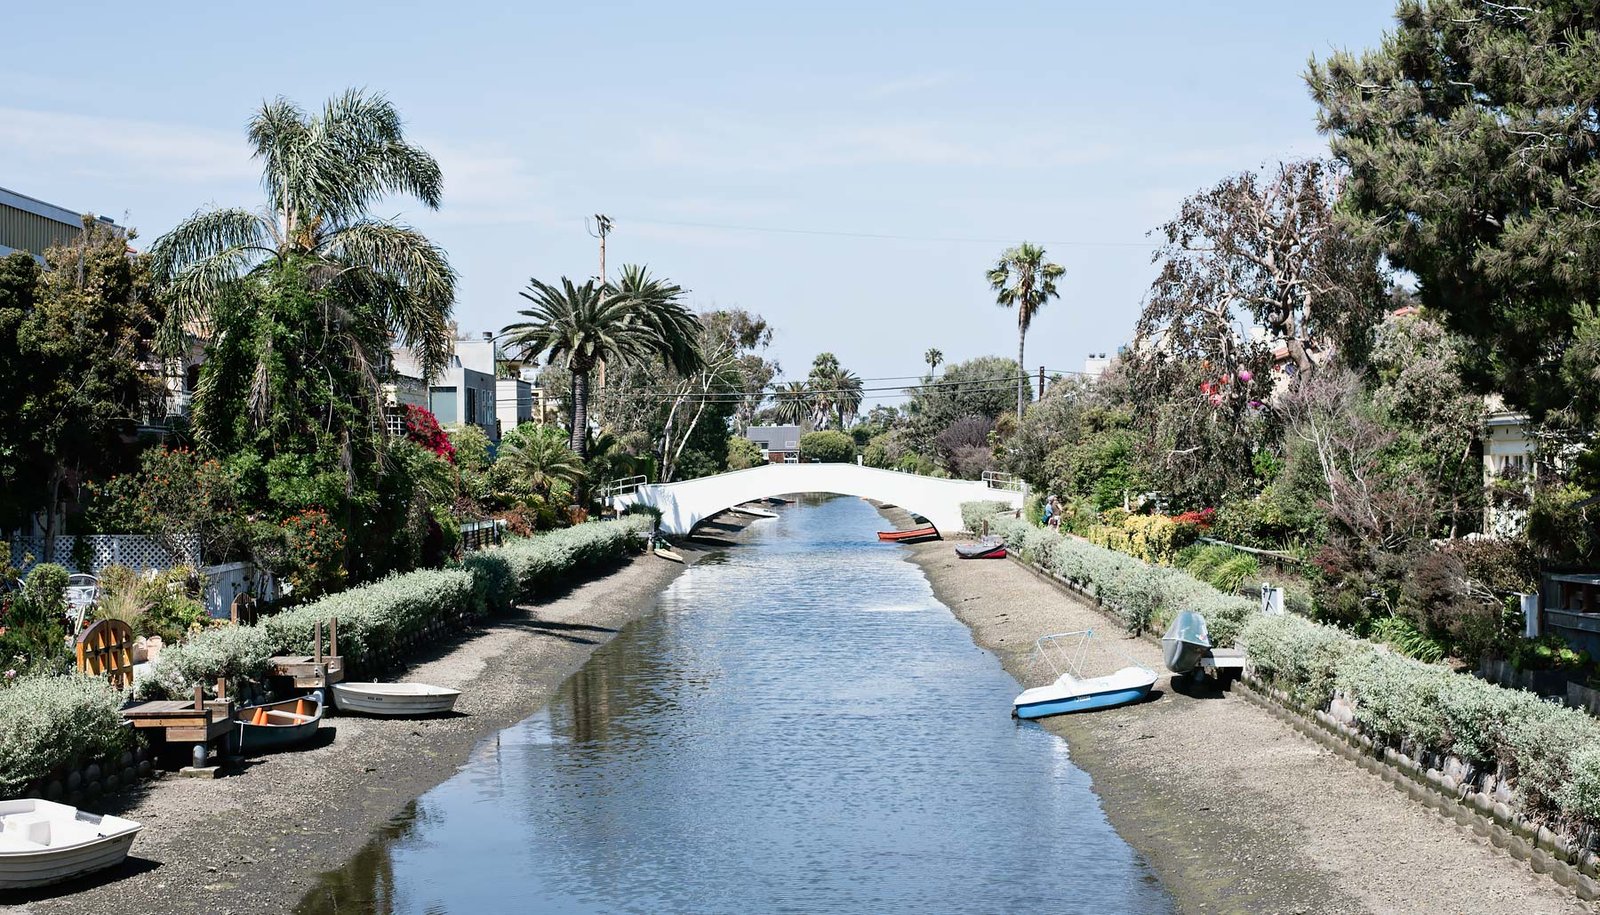 My 10 Favorite Things to do in LA | Venice Canals in Los Angeles 